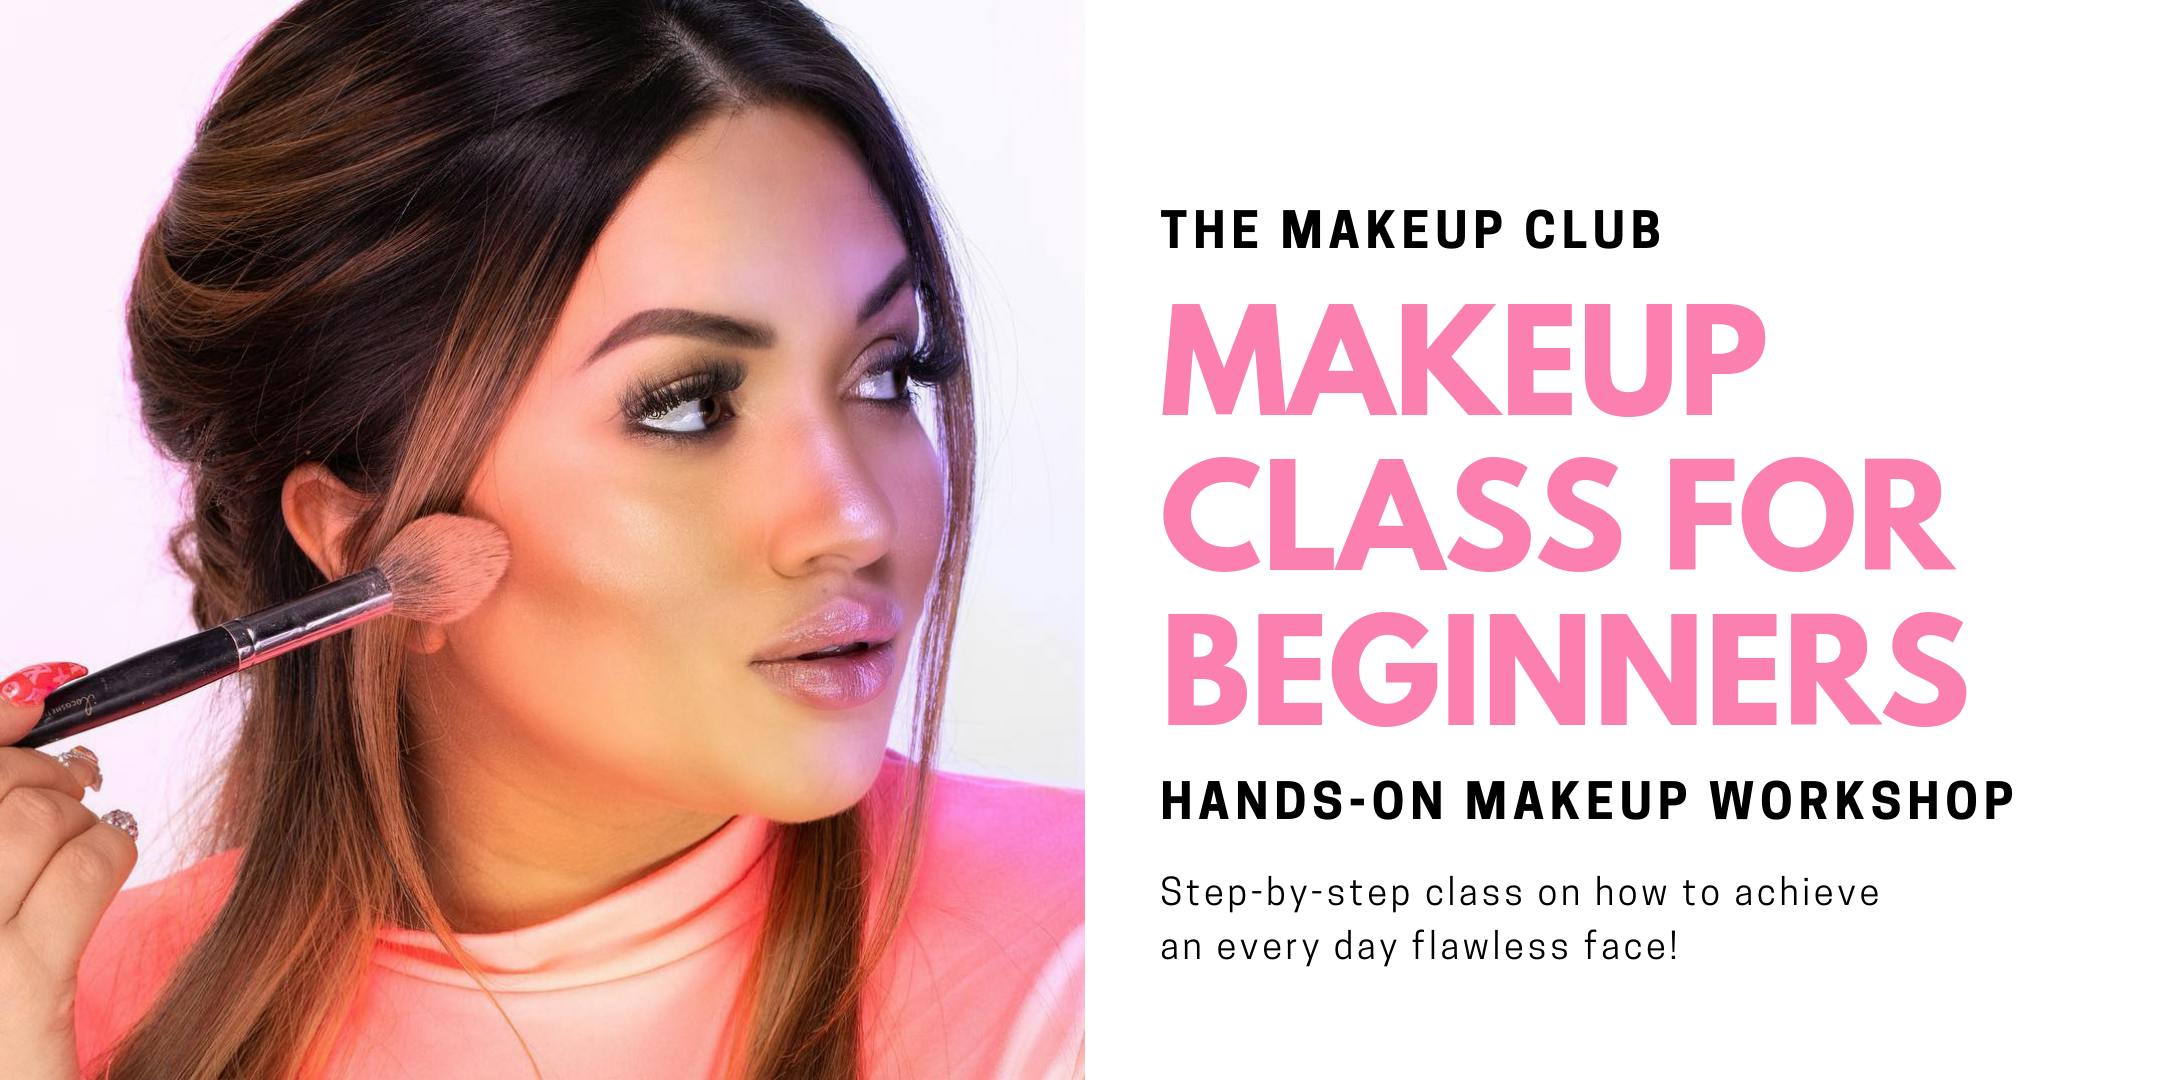 ALL ABOUT THE CANVAS: Beginner Makeup Workshop - 8 MAY 2019